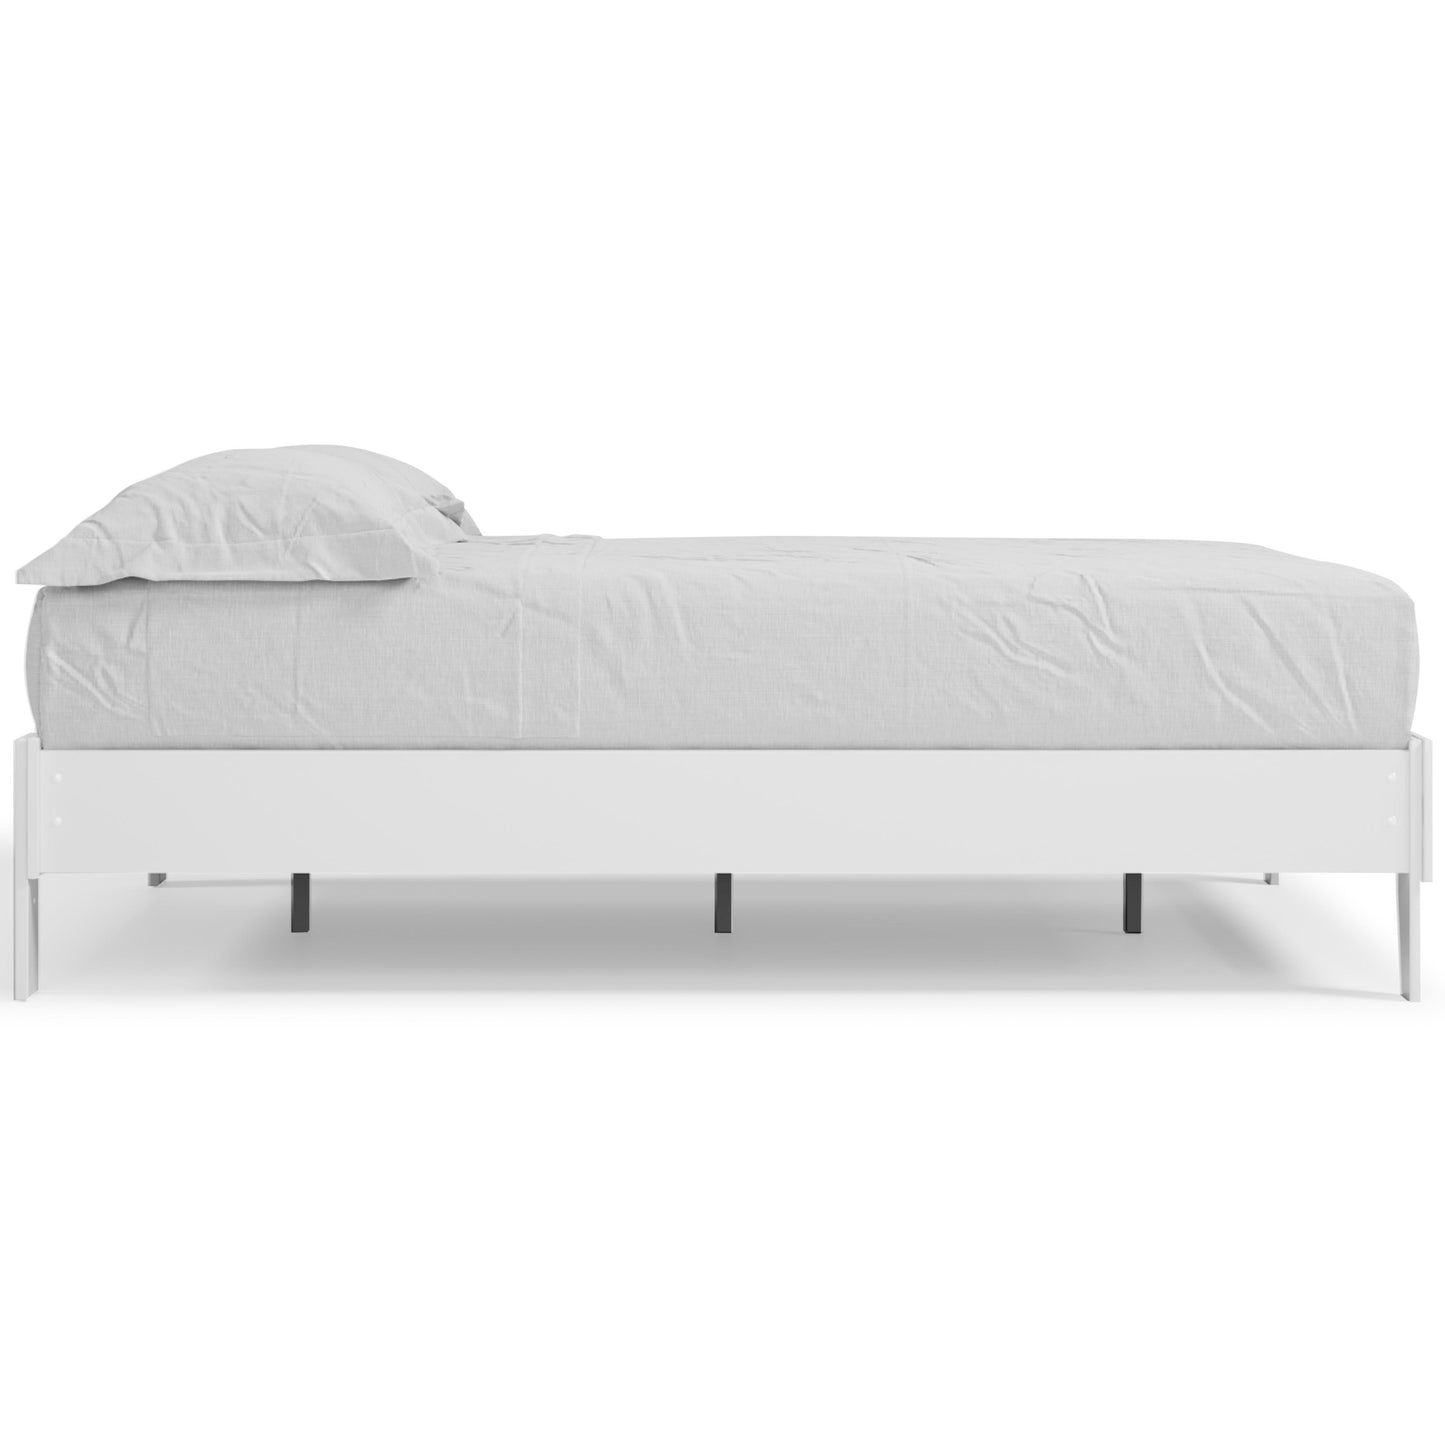 Signature Design by Ashley Piperton Queen Platform Bed EB1221-113 IMAGE 3